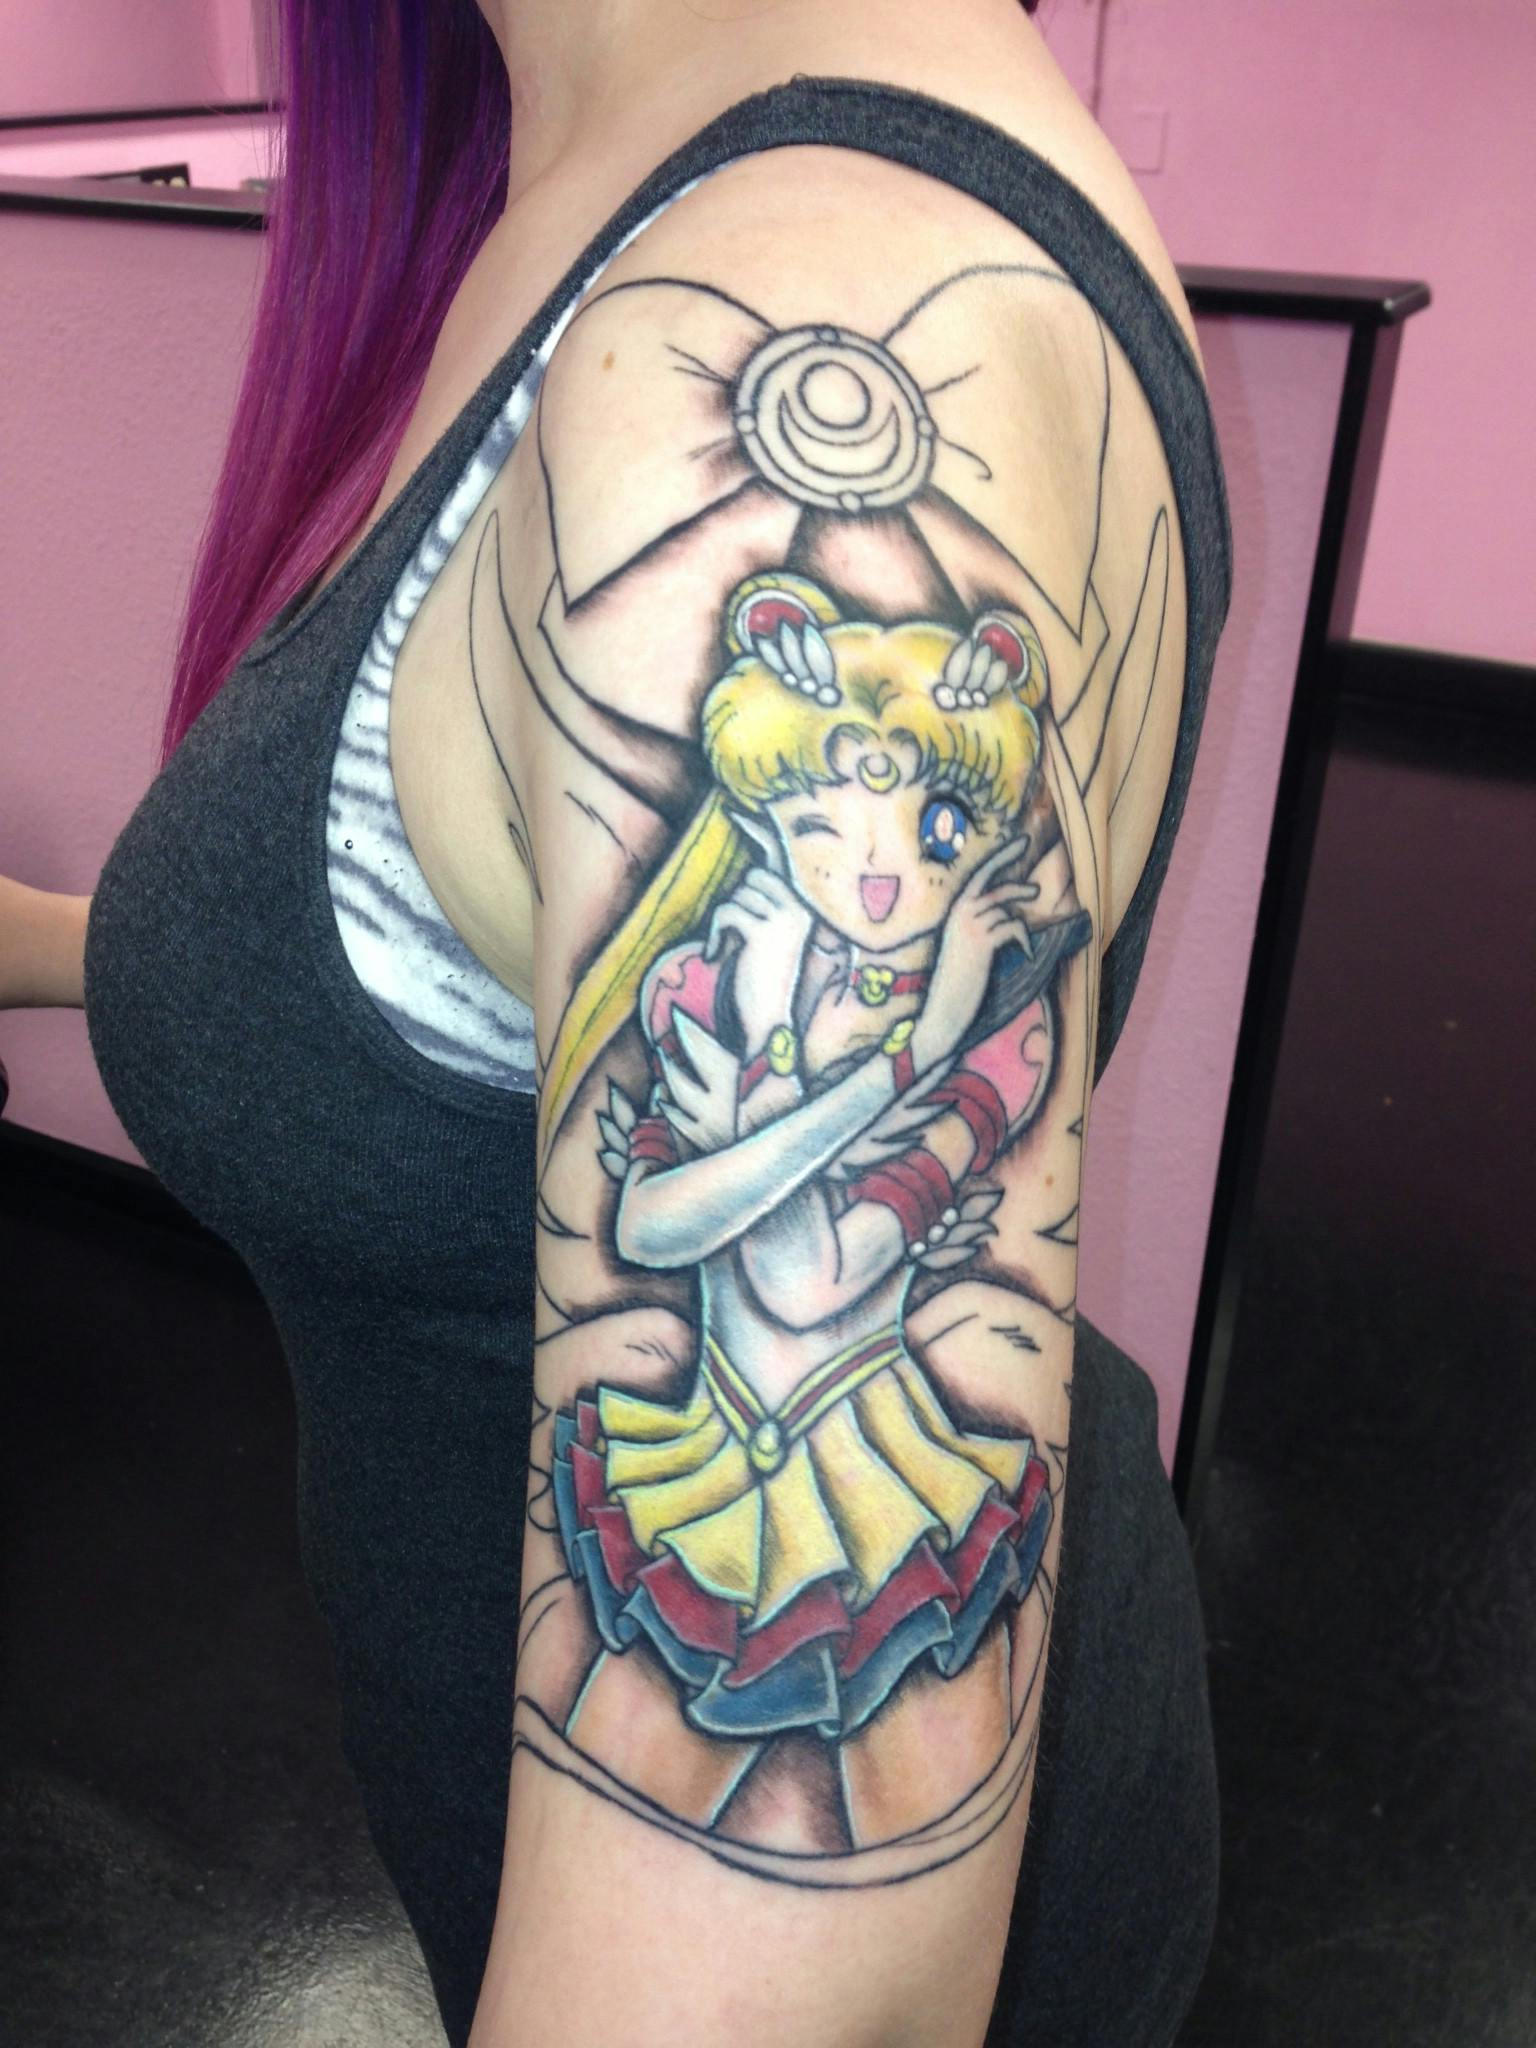 Woman goes in for tiny tattoo, gets giant 'Sailor Moon' sleeve instead -  The Daily Dot